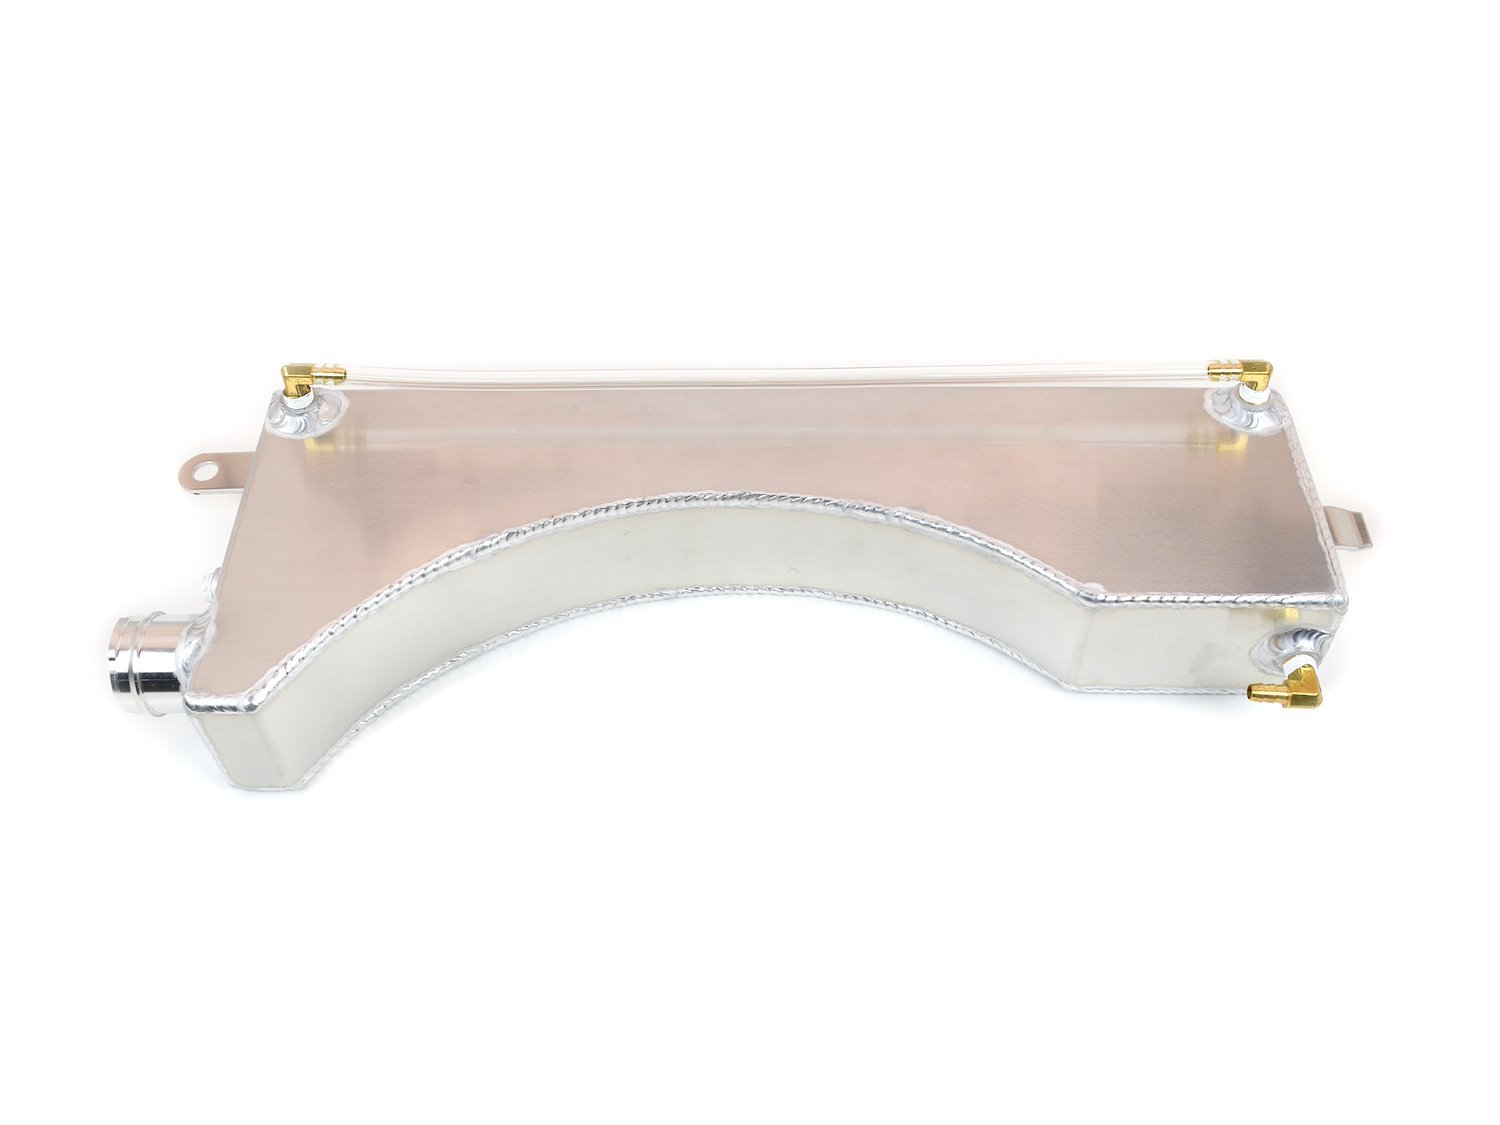 Coolant Expansion Fill Tank 1994-1995 Ford Mustang V8